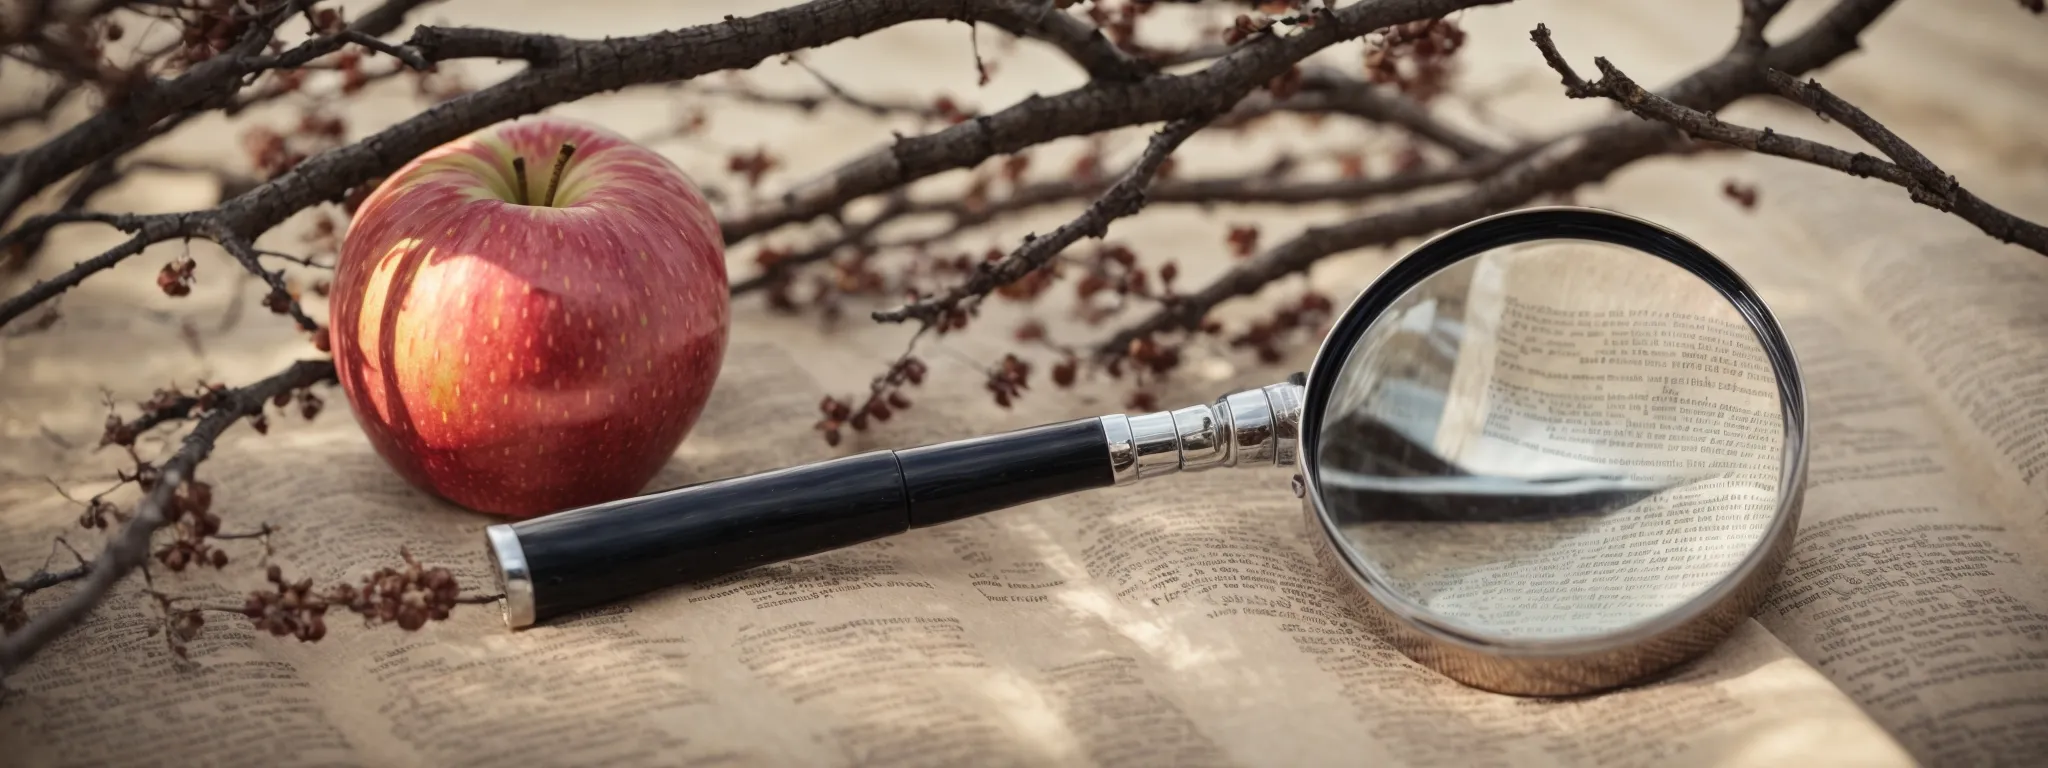 a magnifying glass held over a background of blurred web pages, focusing on a bright, ripe apple amidst a tangled network of branches.